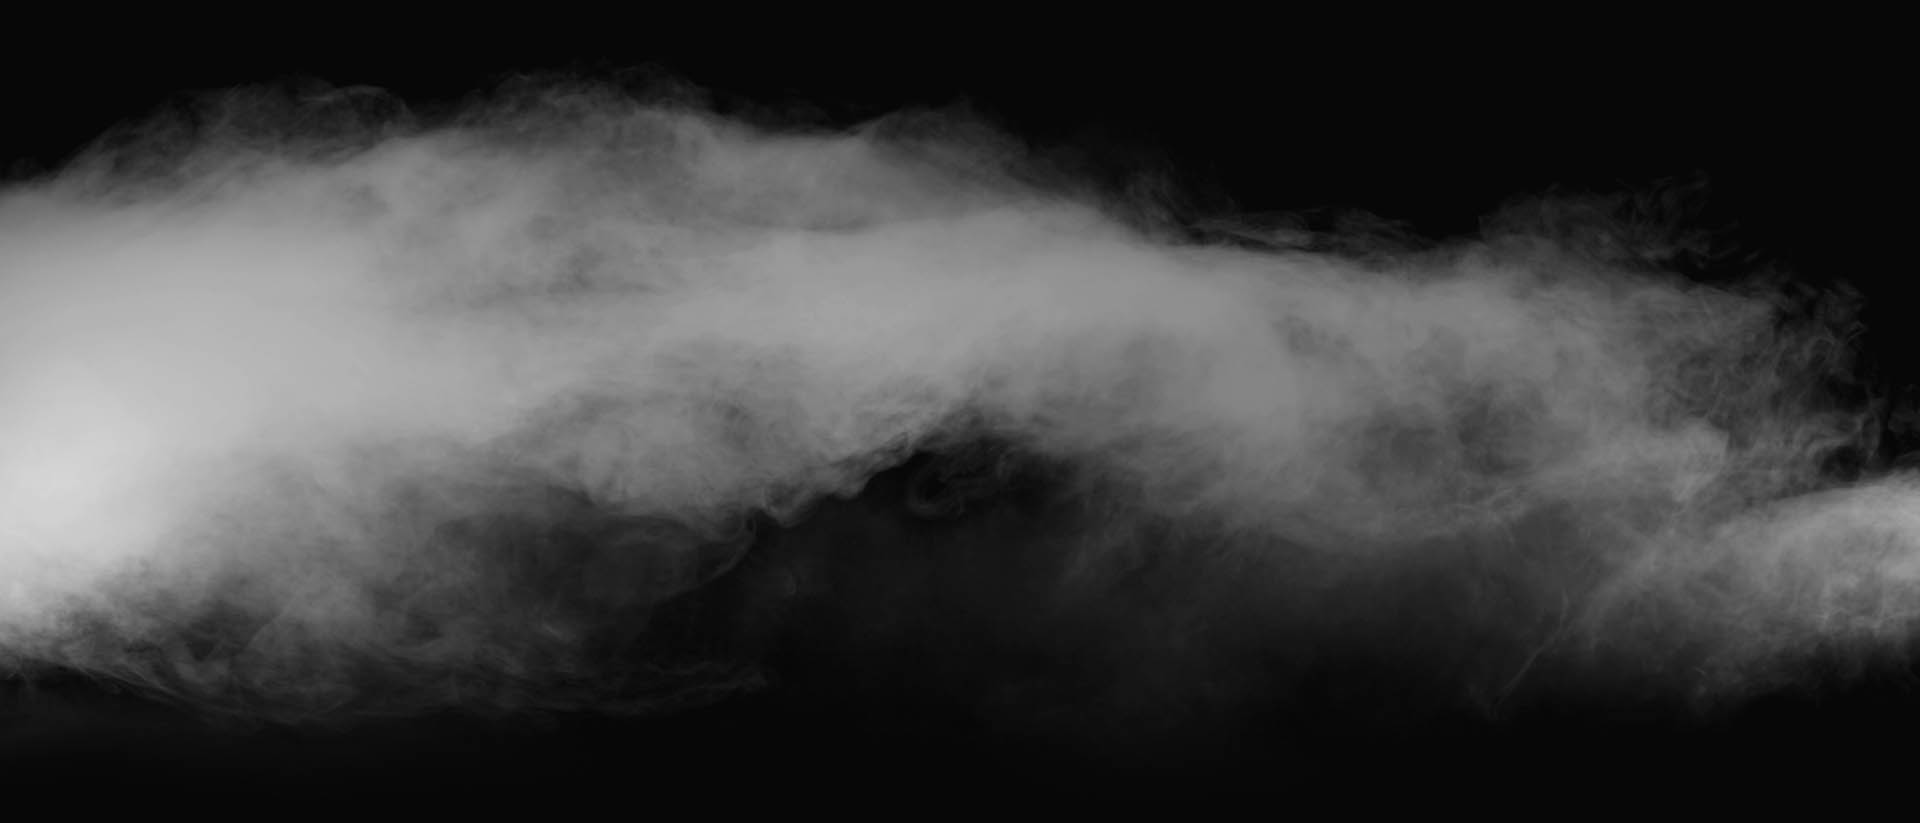 Our New Atmospheric Smoke & Fog Vol. 2 VFX Assets are Here!